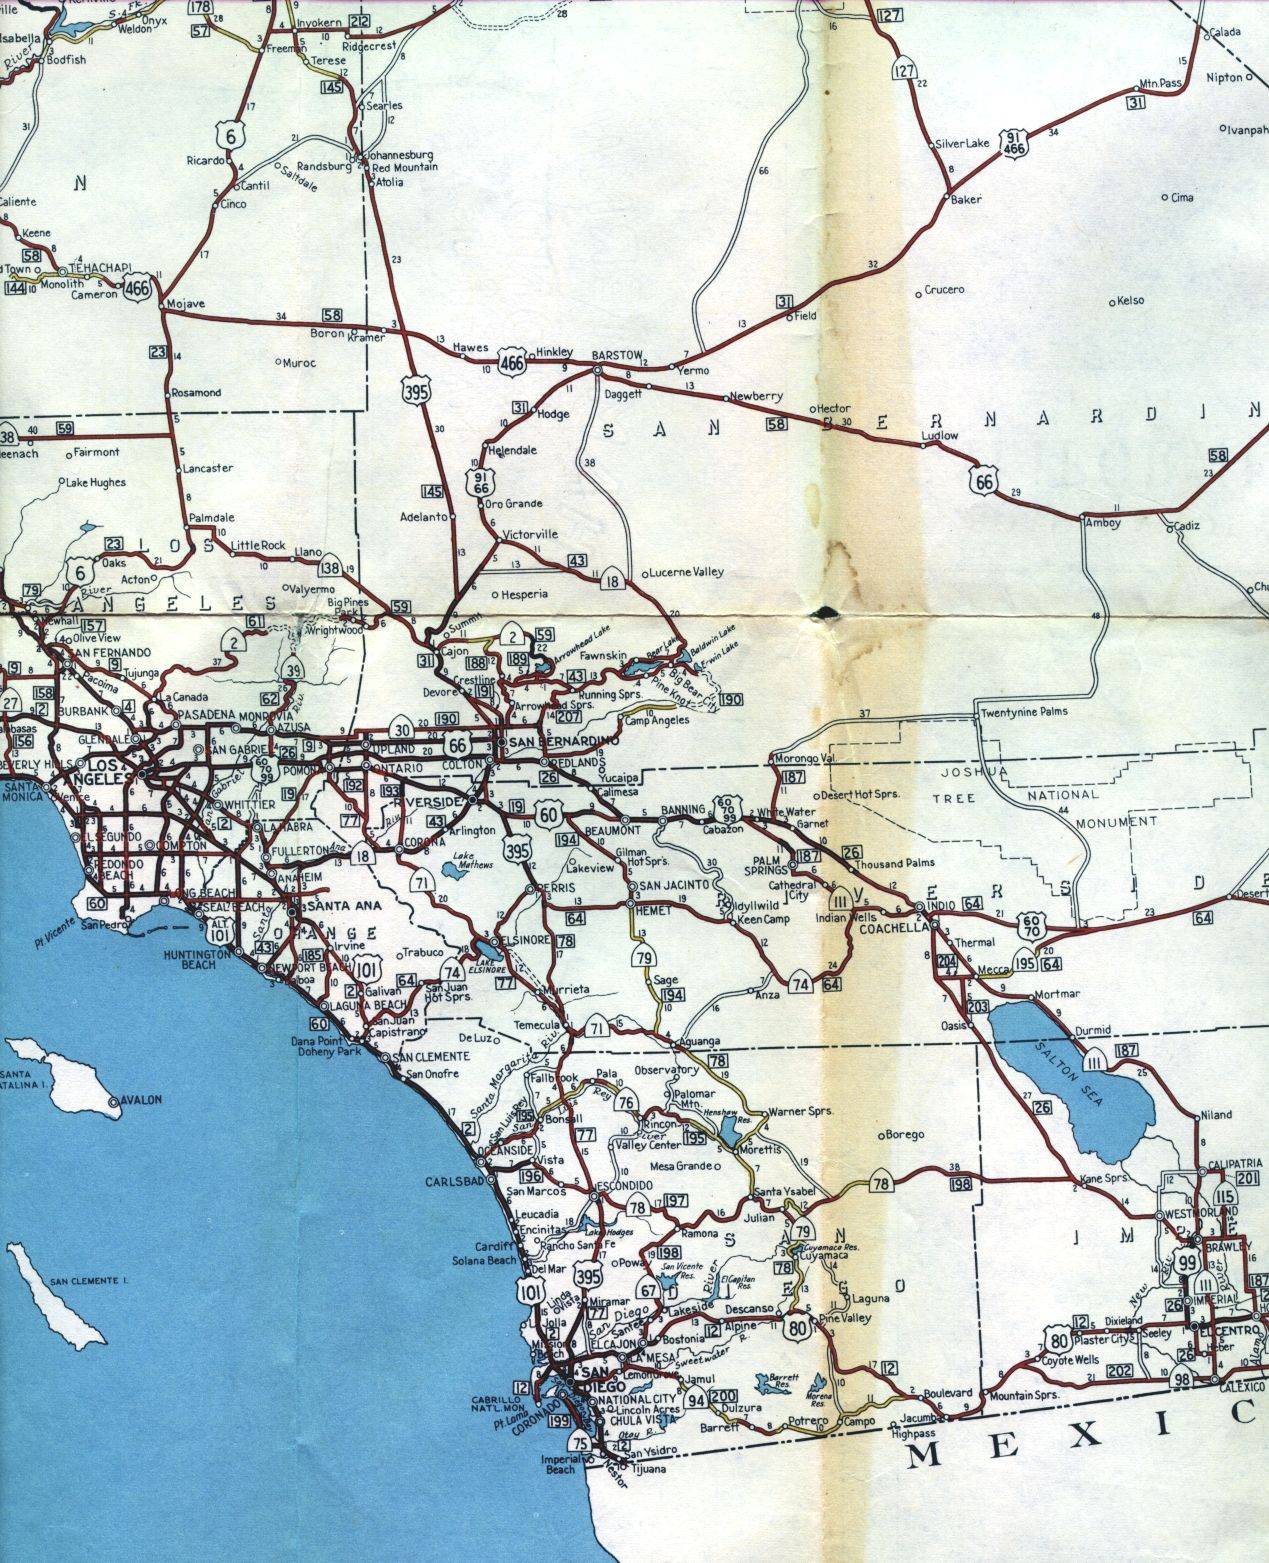 Section of 1956 official highway map for California